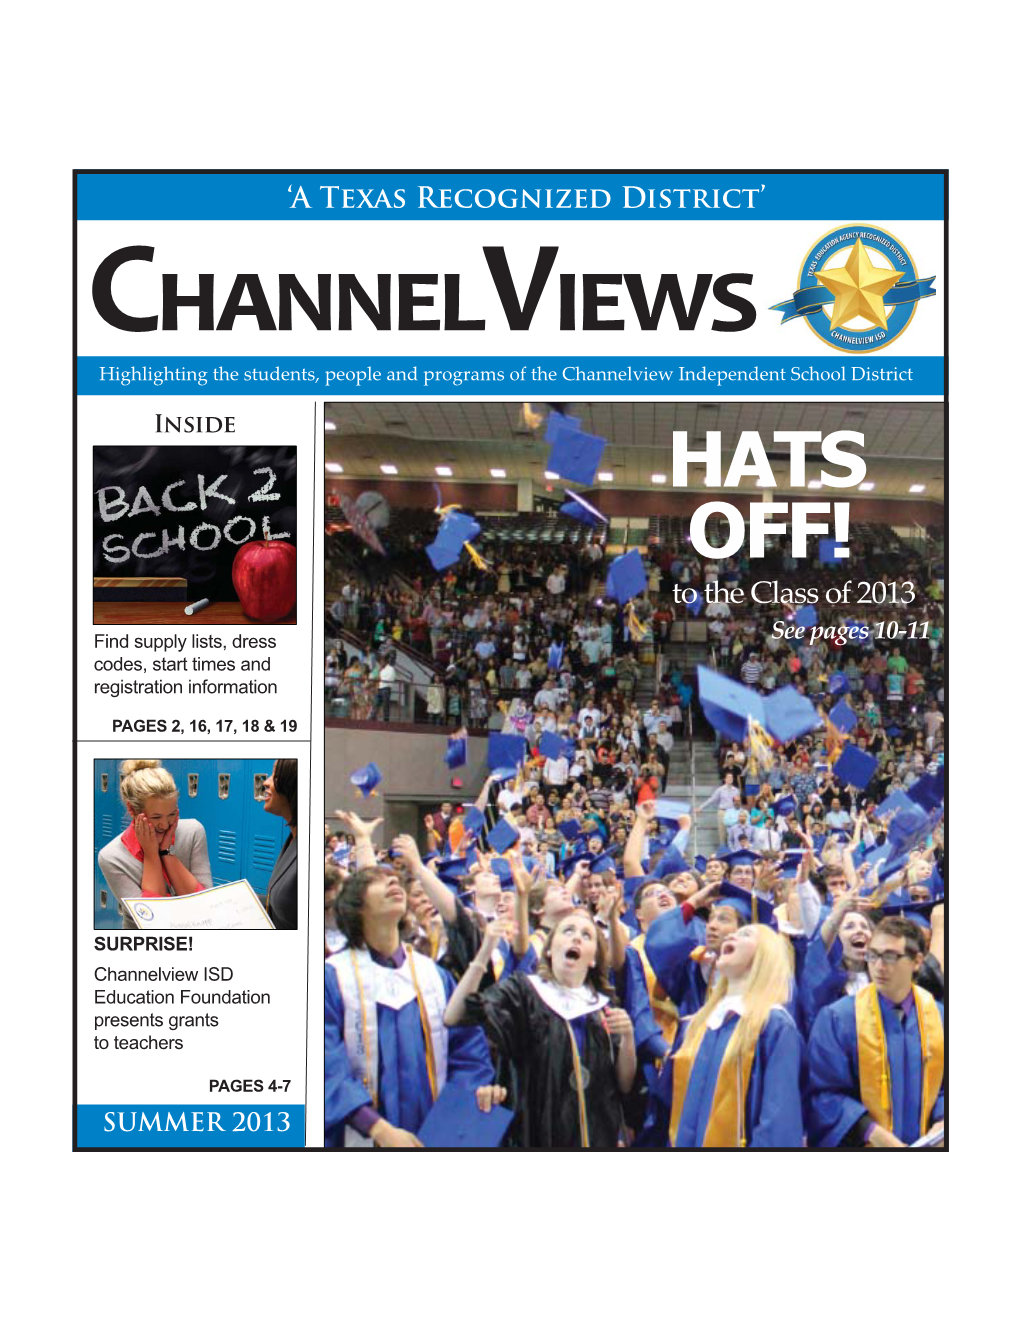 CHANNELVIEWS Highlighting the Students, People and Programs of the Channelview Independent School District Inside